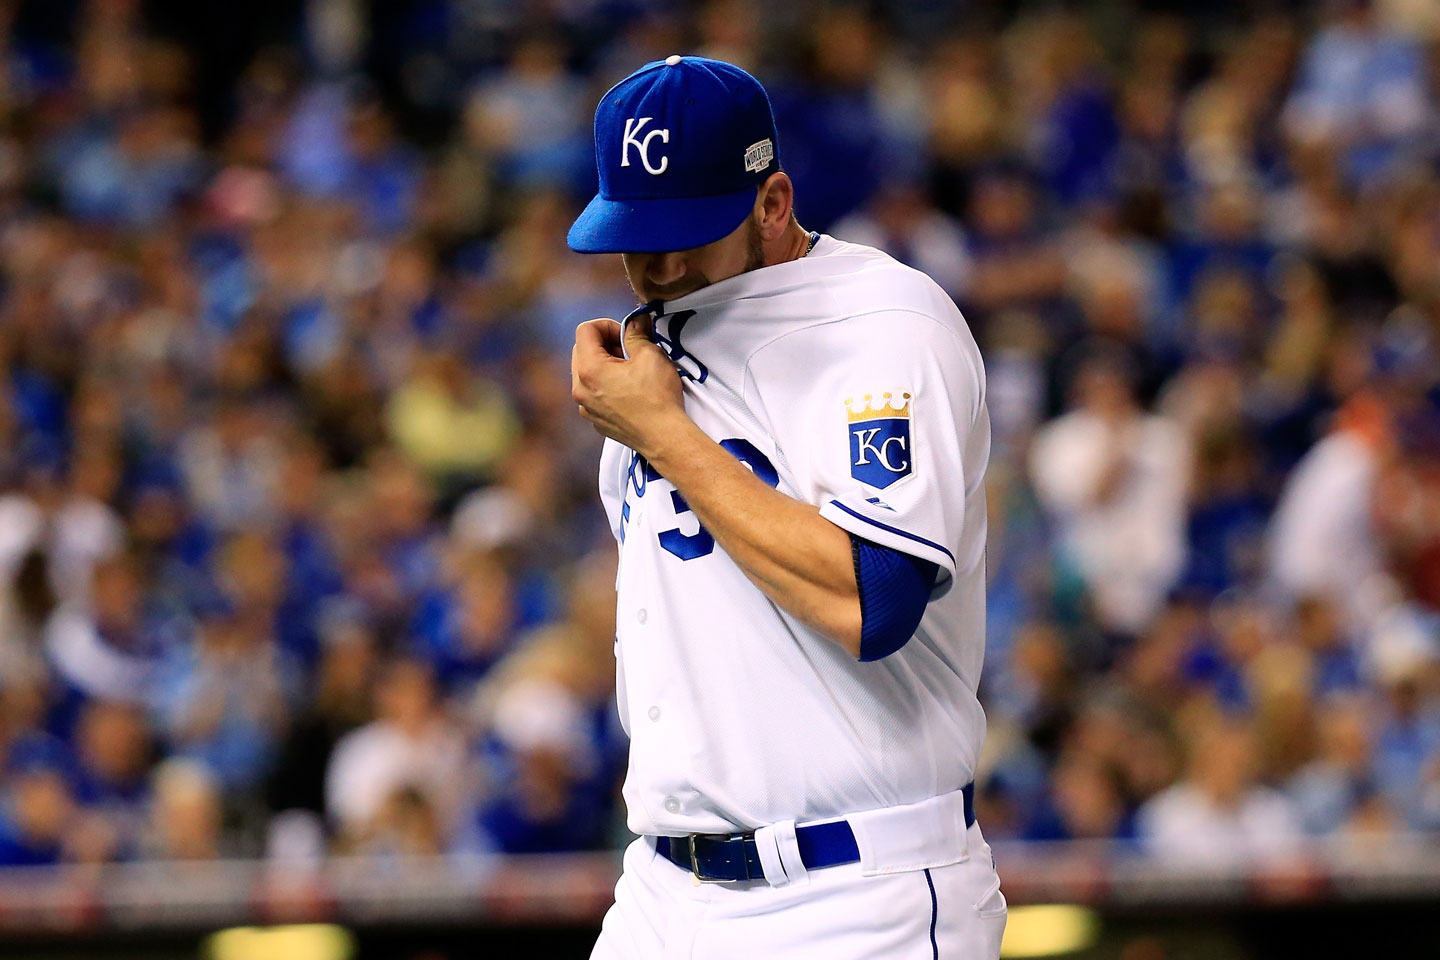 Royals starter James Shields is pulled after allowing the first three Giants to reach base in the top of the fourth -- the final blow being Morse's single to make the score 4-0. Shields was eventually charged with five earned runs on seven hits in just three complete innings.   (Rob Carr/Getty Images)